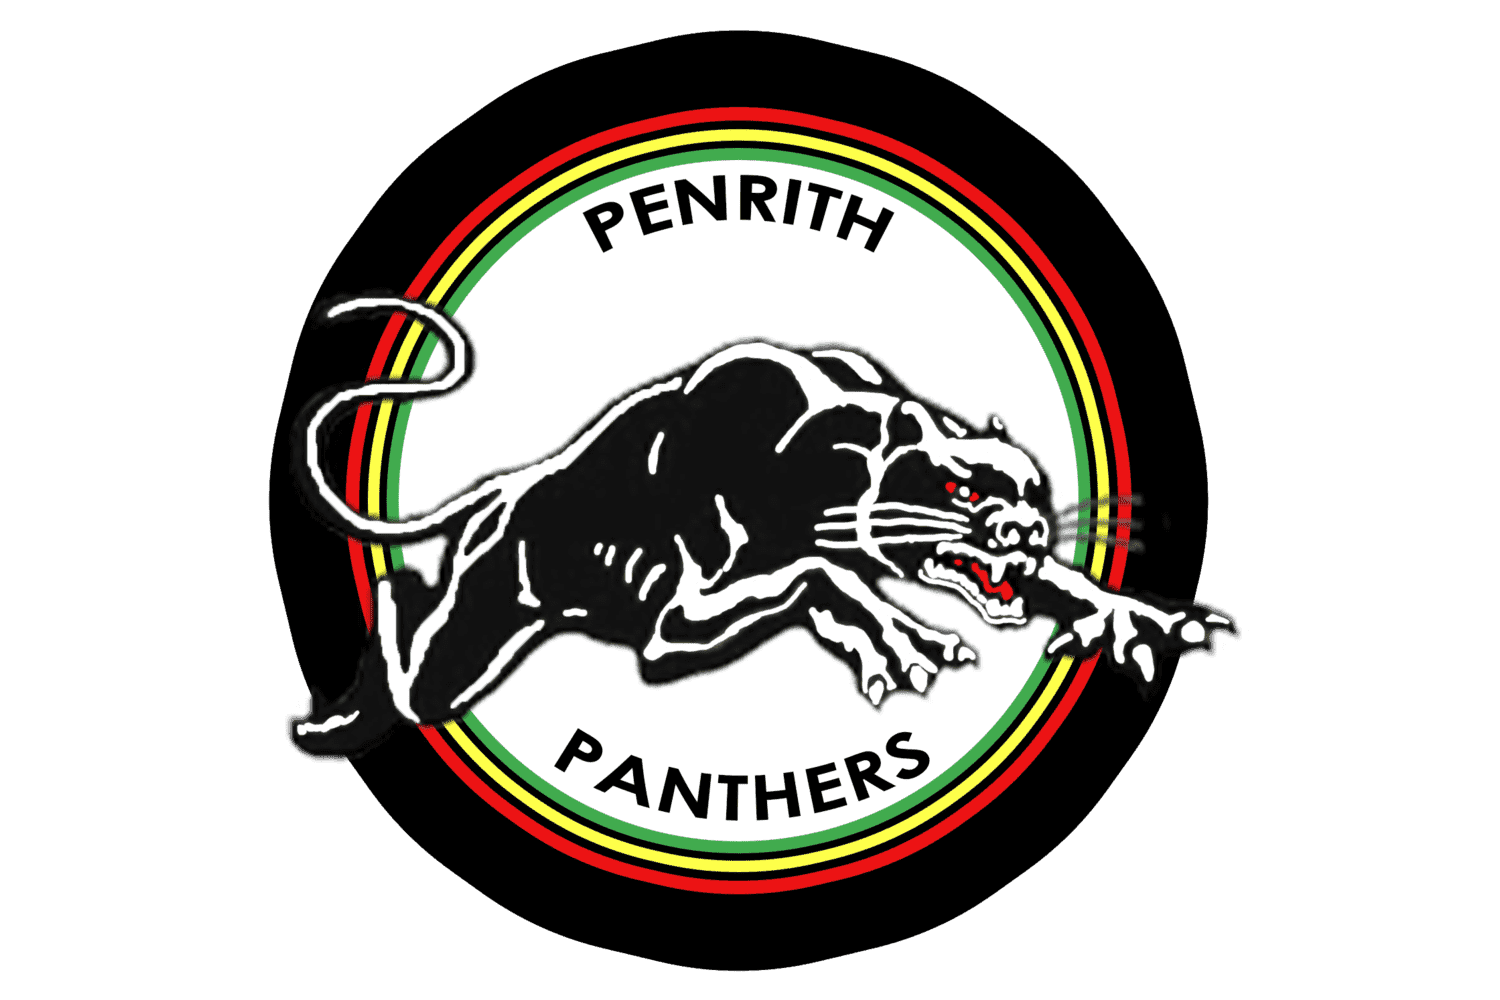 Penrith Panthers NRL Mouse Pad Rugby 18cm x 22cm Team Logo